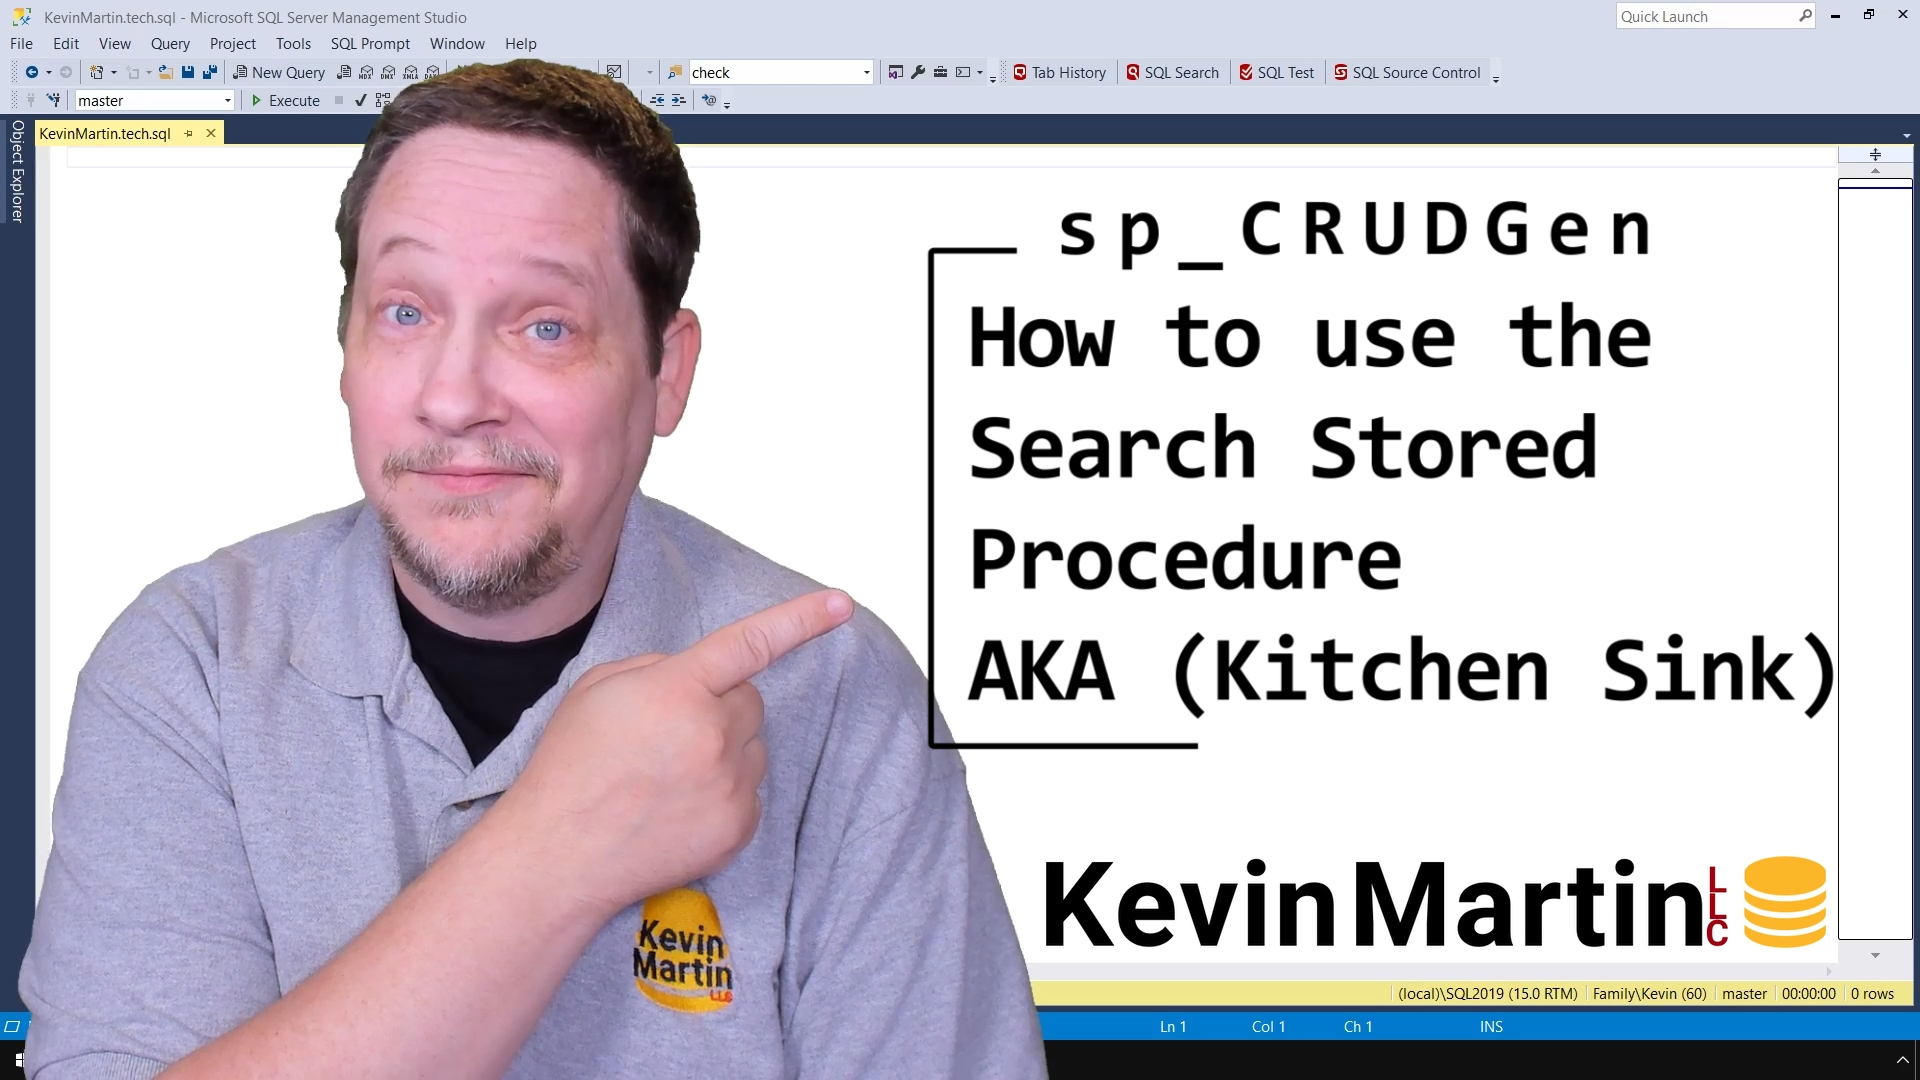 sp_CRUDGen – How to use the Search Stored Procedure AKA (Kitchen Sink)